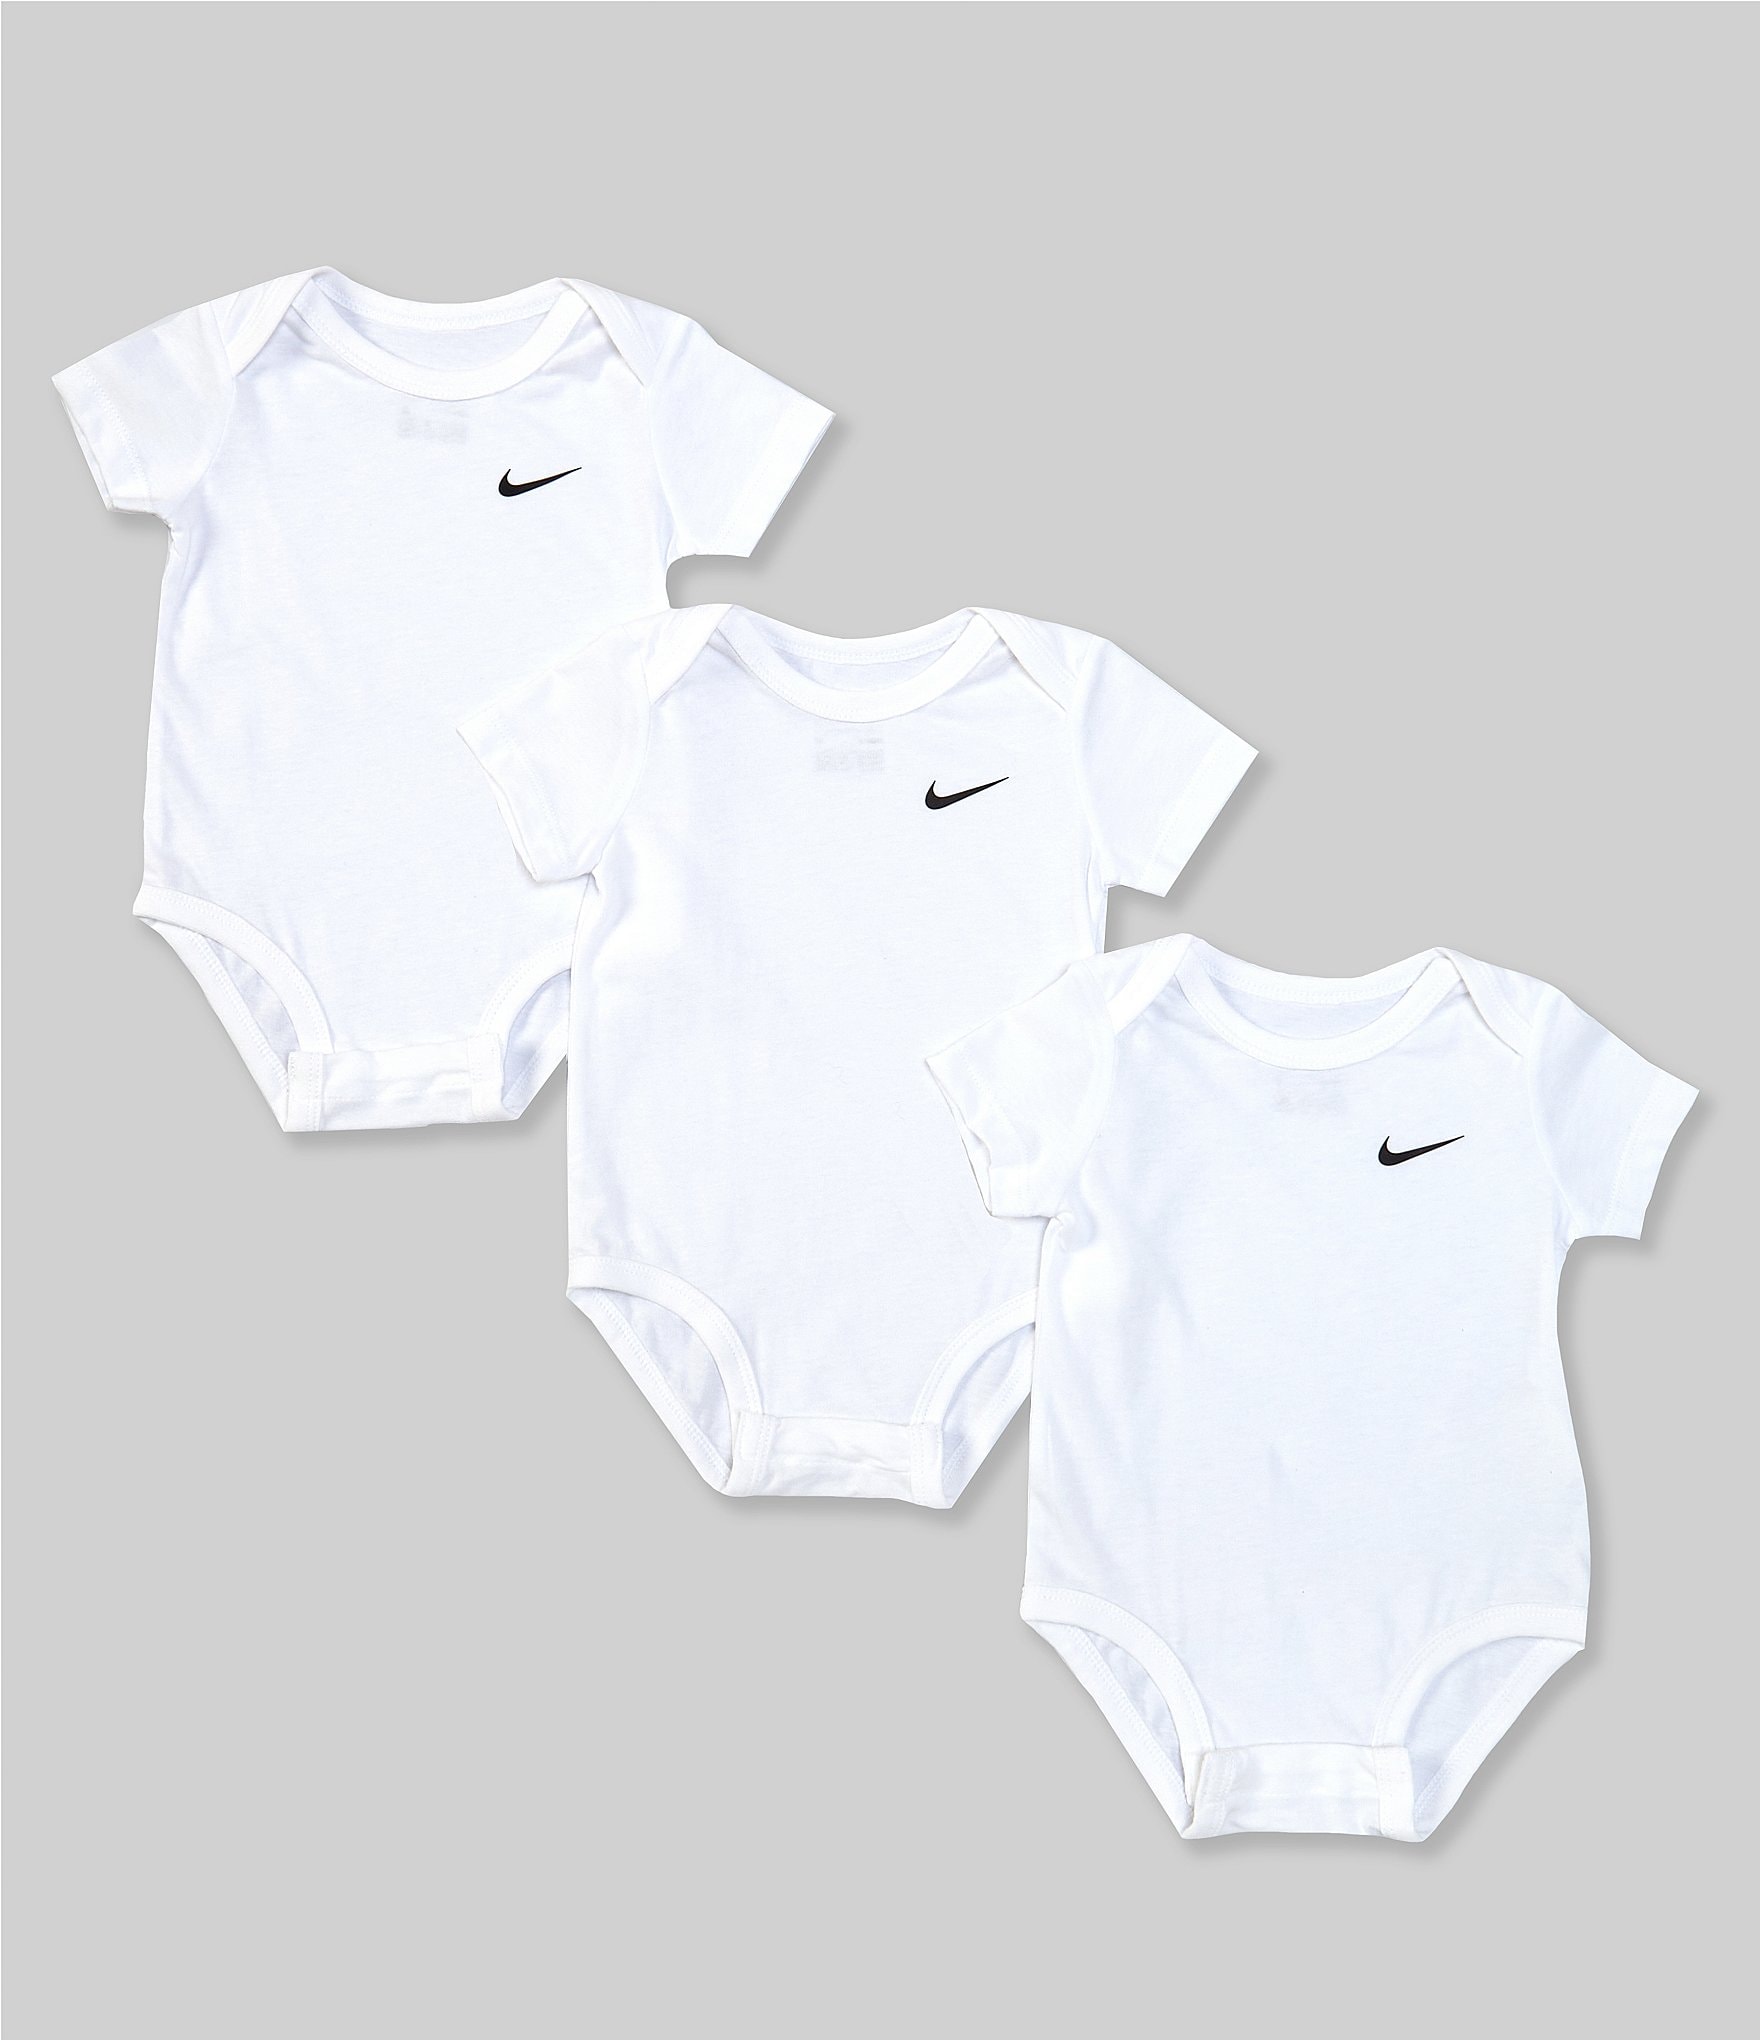 Nike Baby Girl Clothes 0-24 Months 